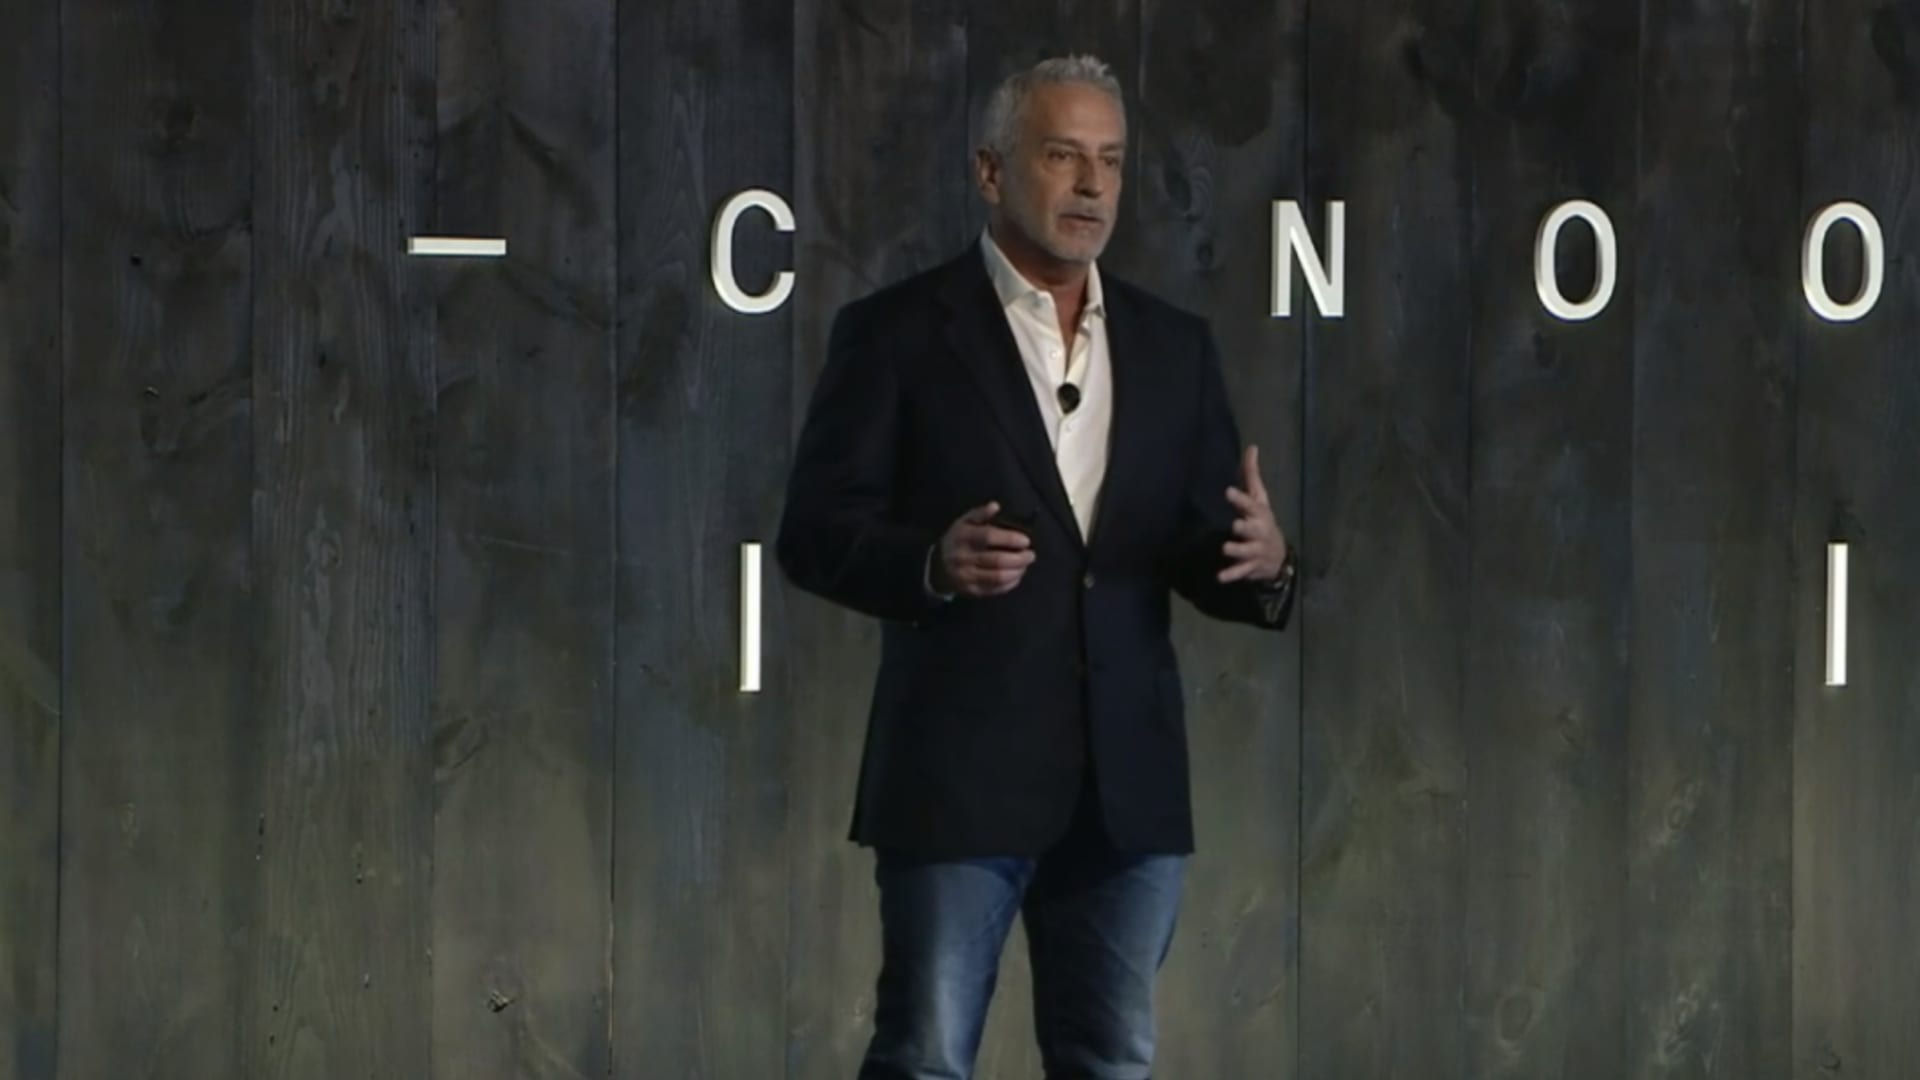 Canoo CEO and Chairman Tony Aquila speaks during an investor event for the company on June 17, 2021. The event was held in Dallas and broadcast onine.